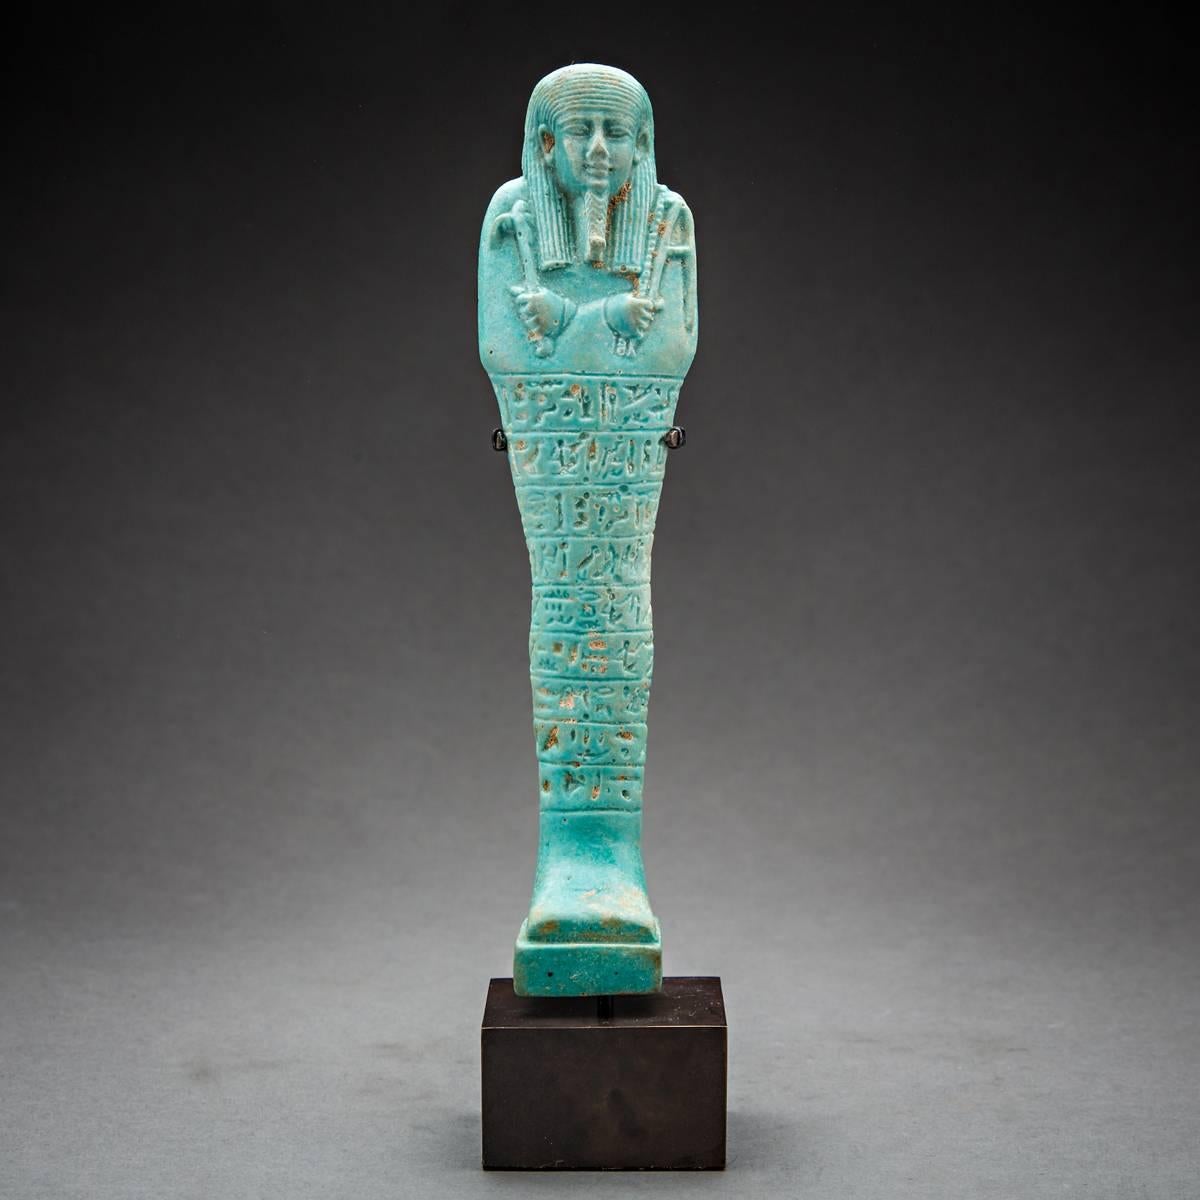 Ushabti were funerary figurines placed in tombs among the grave goods in Ancient Egypt and were intended to act as servant figures that carried out the tasks required of the deceased in the underworld. Very often they carry inscriptions in